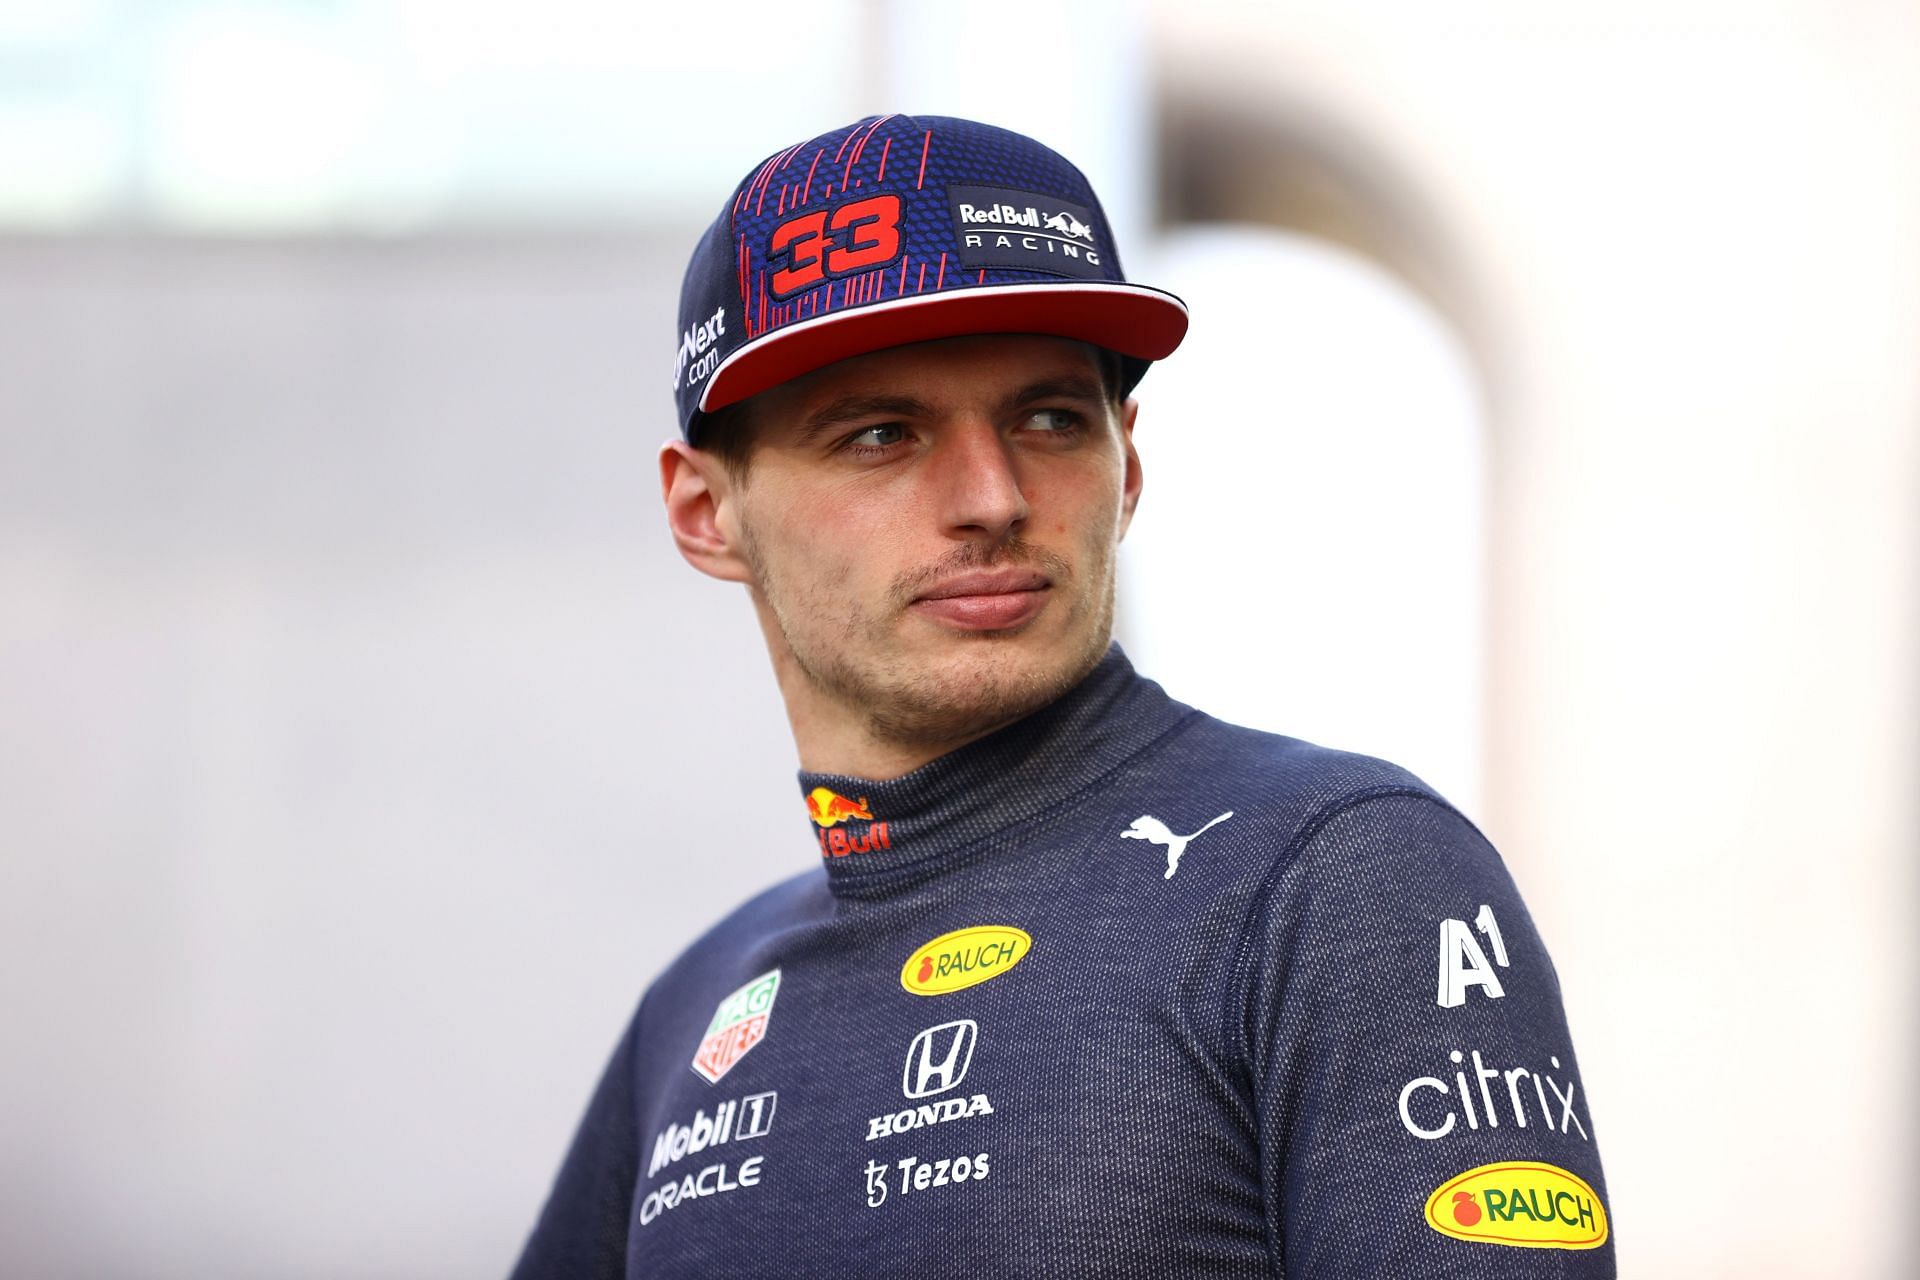 Max Verstappen looks on at the Red Bull Racing team photo during previews ahead of the 2021 Abu Dhabi GP. (Photo by Bryn Lennon/Getty Images)